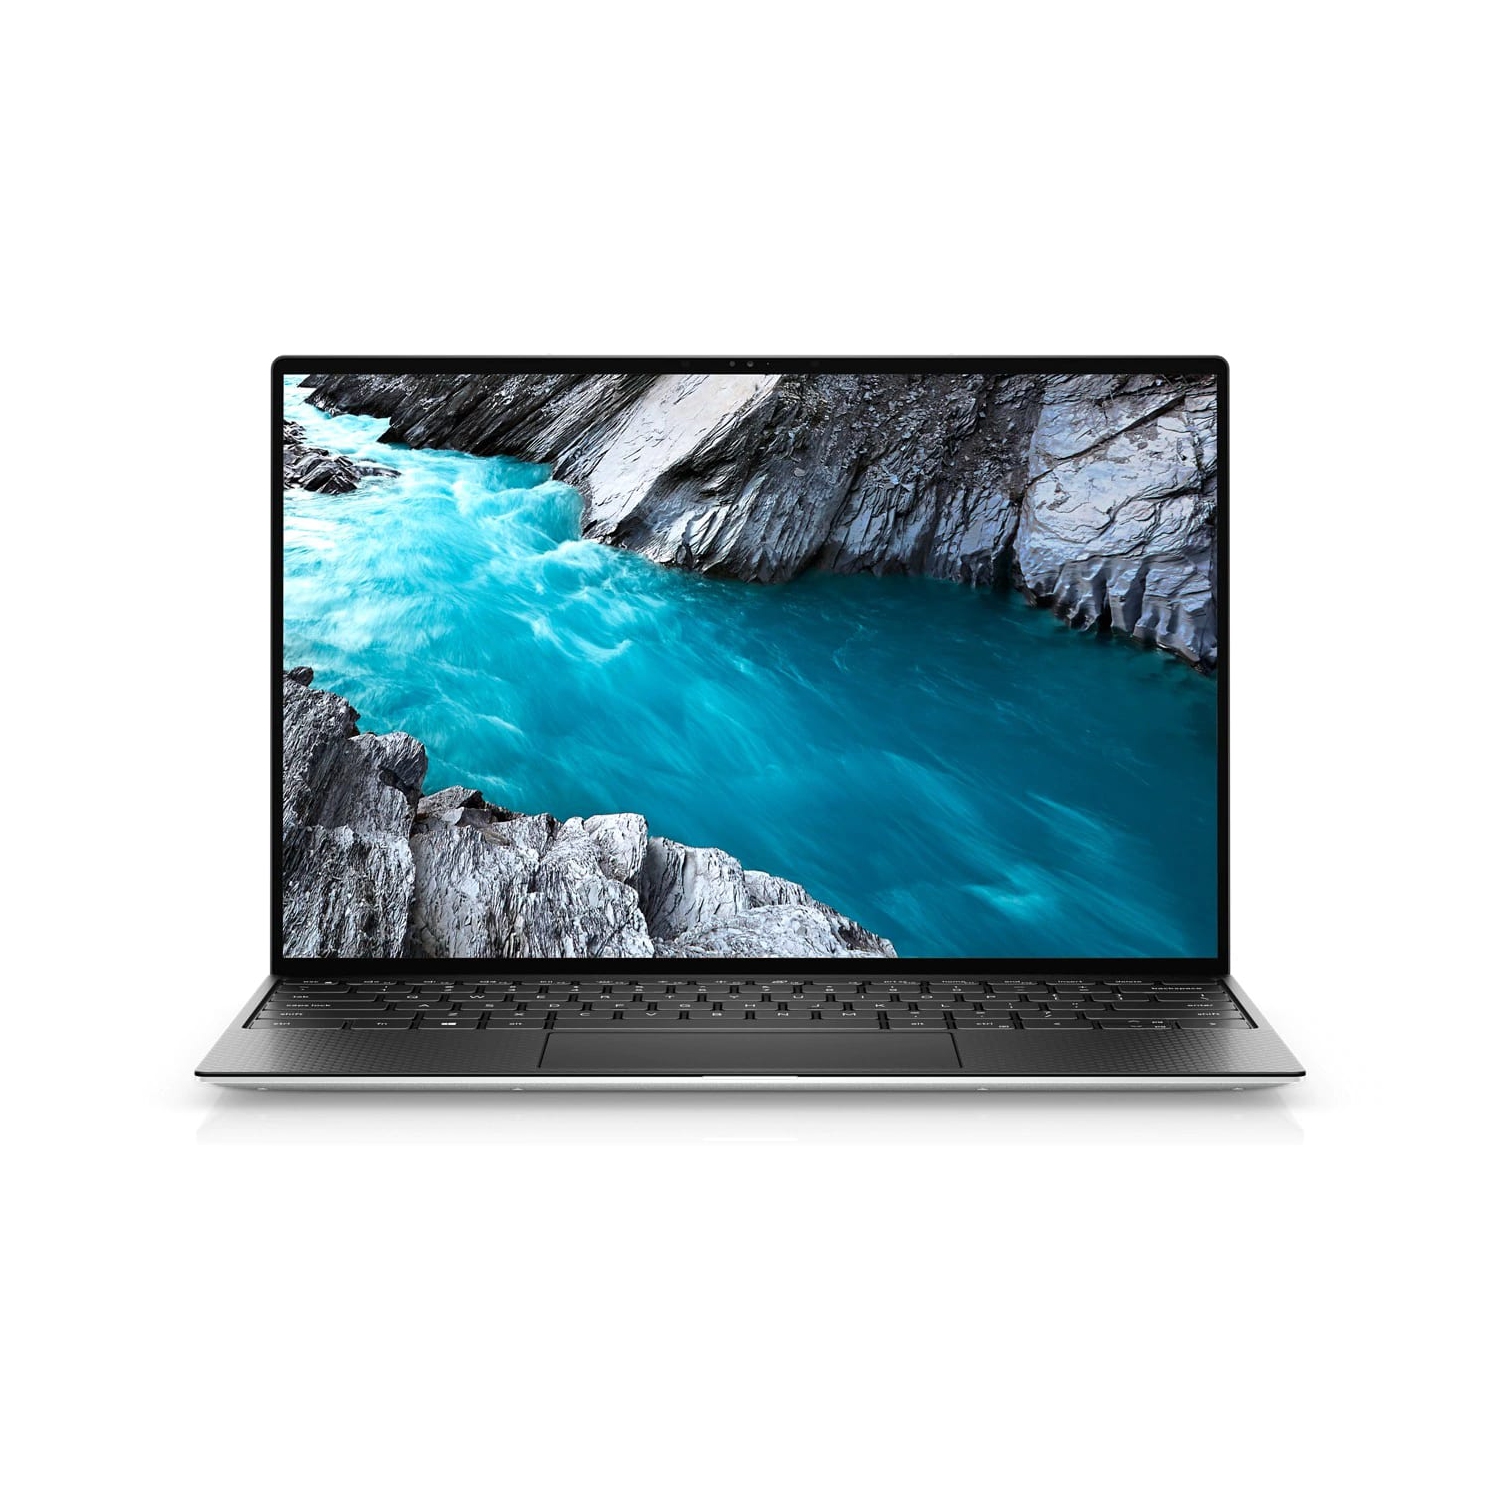 Refurbished (Excellent) - Dell XPS 13 9310 Laptop (2020) | 13.4" FHD+ | Core i7 - 1TB SSD - 8GB RAM | 4 Cores @ 4.7 GHz - 11th Gen CPU Certified Refurbished